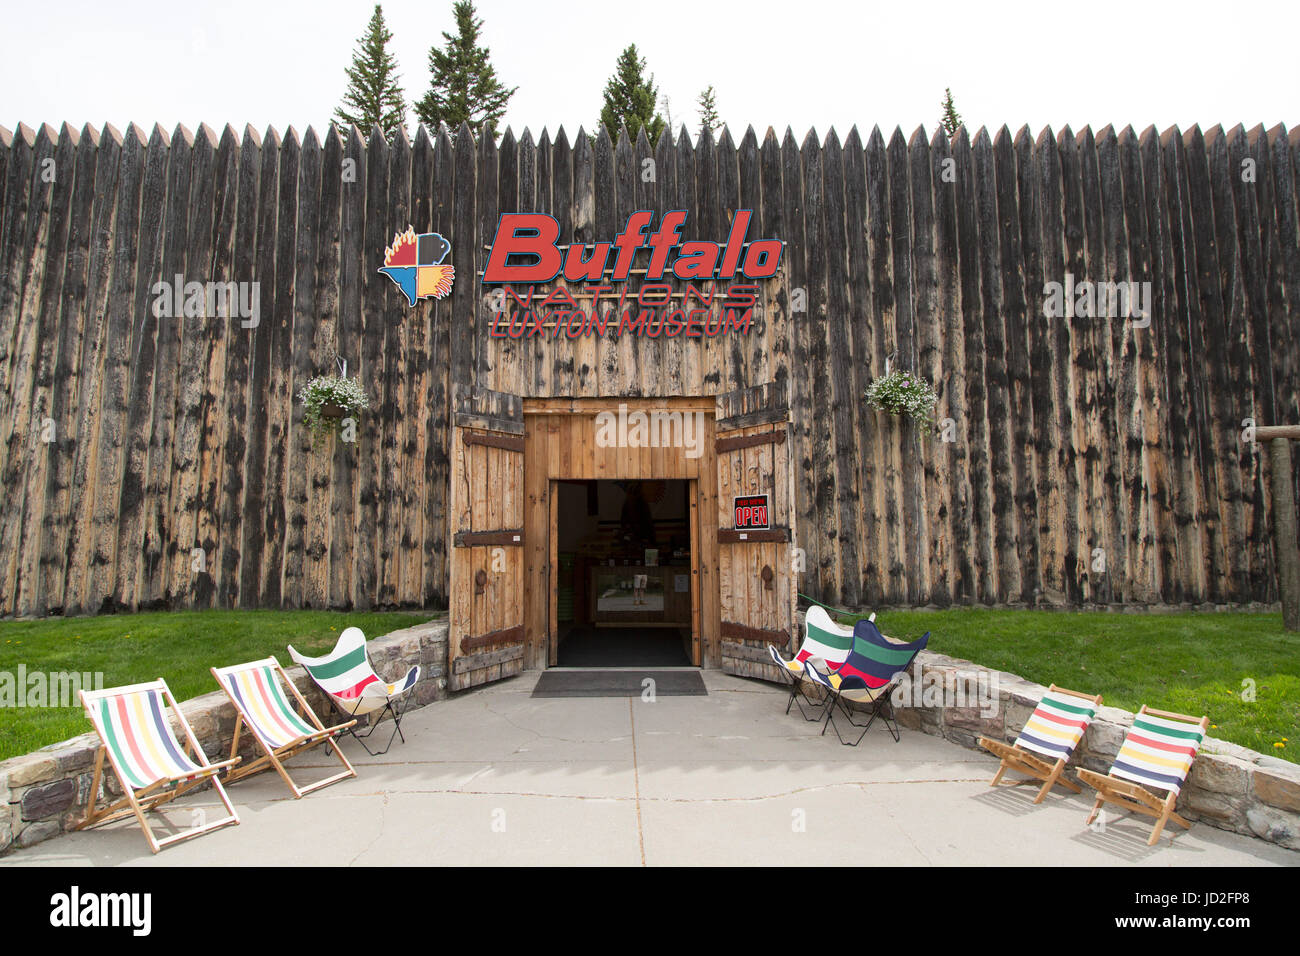 Entrance to the Buffalo Nations Luxton Museum at Banff in Alberta, Canada. The museum interprets First Nations heritage. Stock Photo